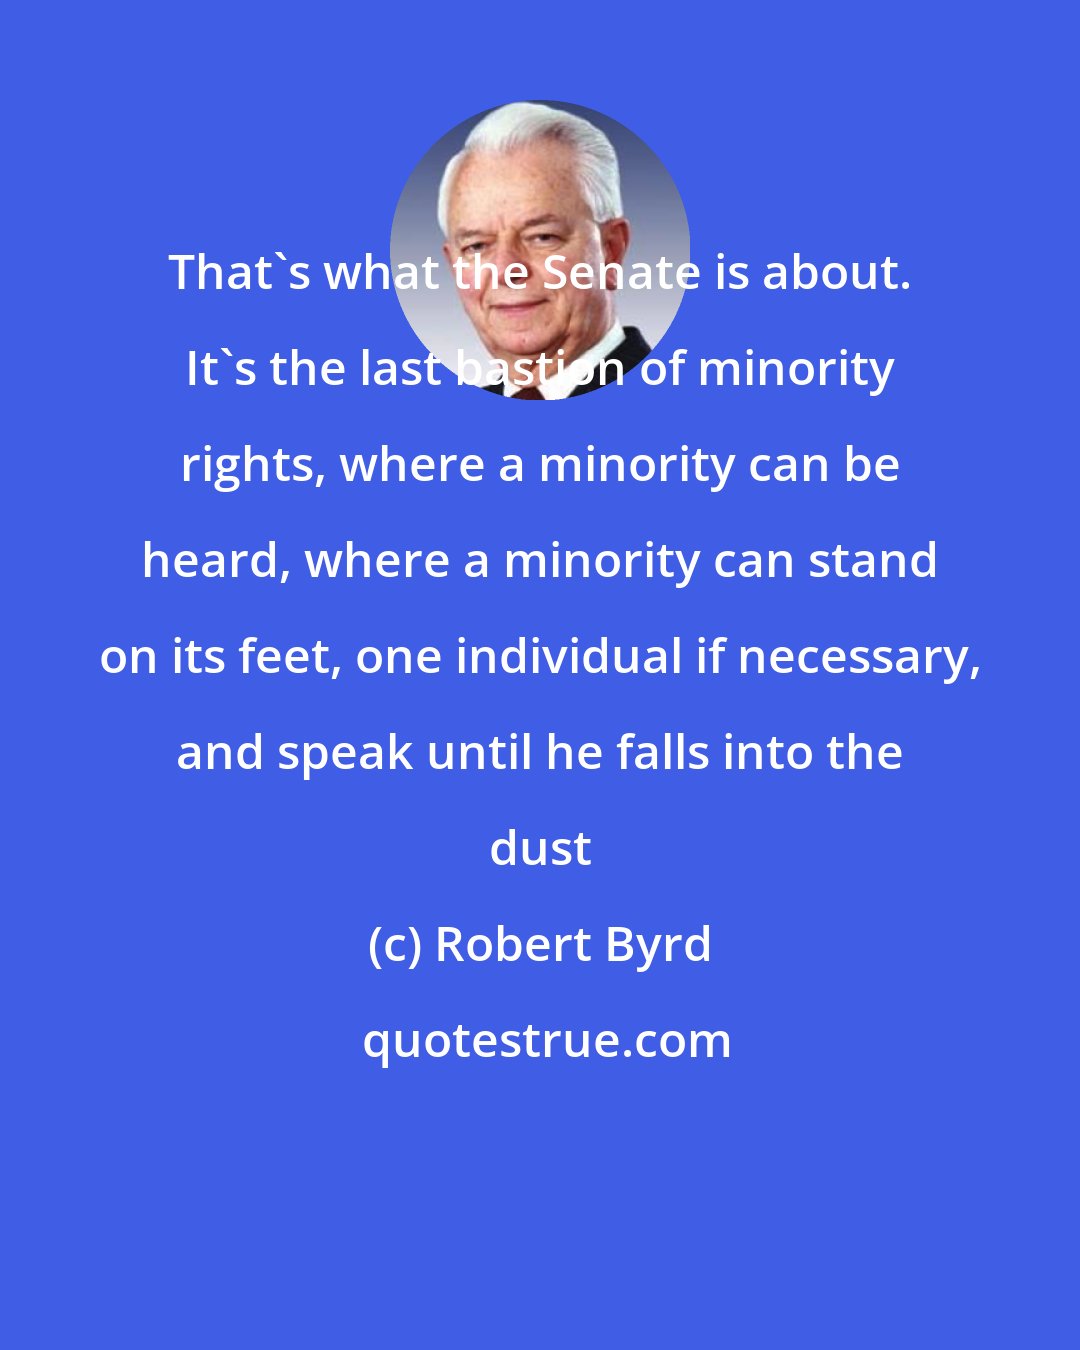 Robert Byrd: That's what the Senate is about. It's the last bastion of minority rights, where a minority can be heard, where a minority can stand on its feet, one individual if necessary, and speak until he falls into the dust